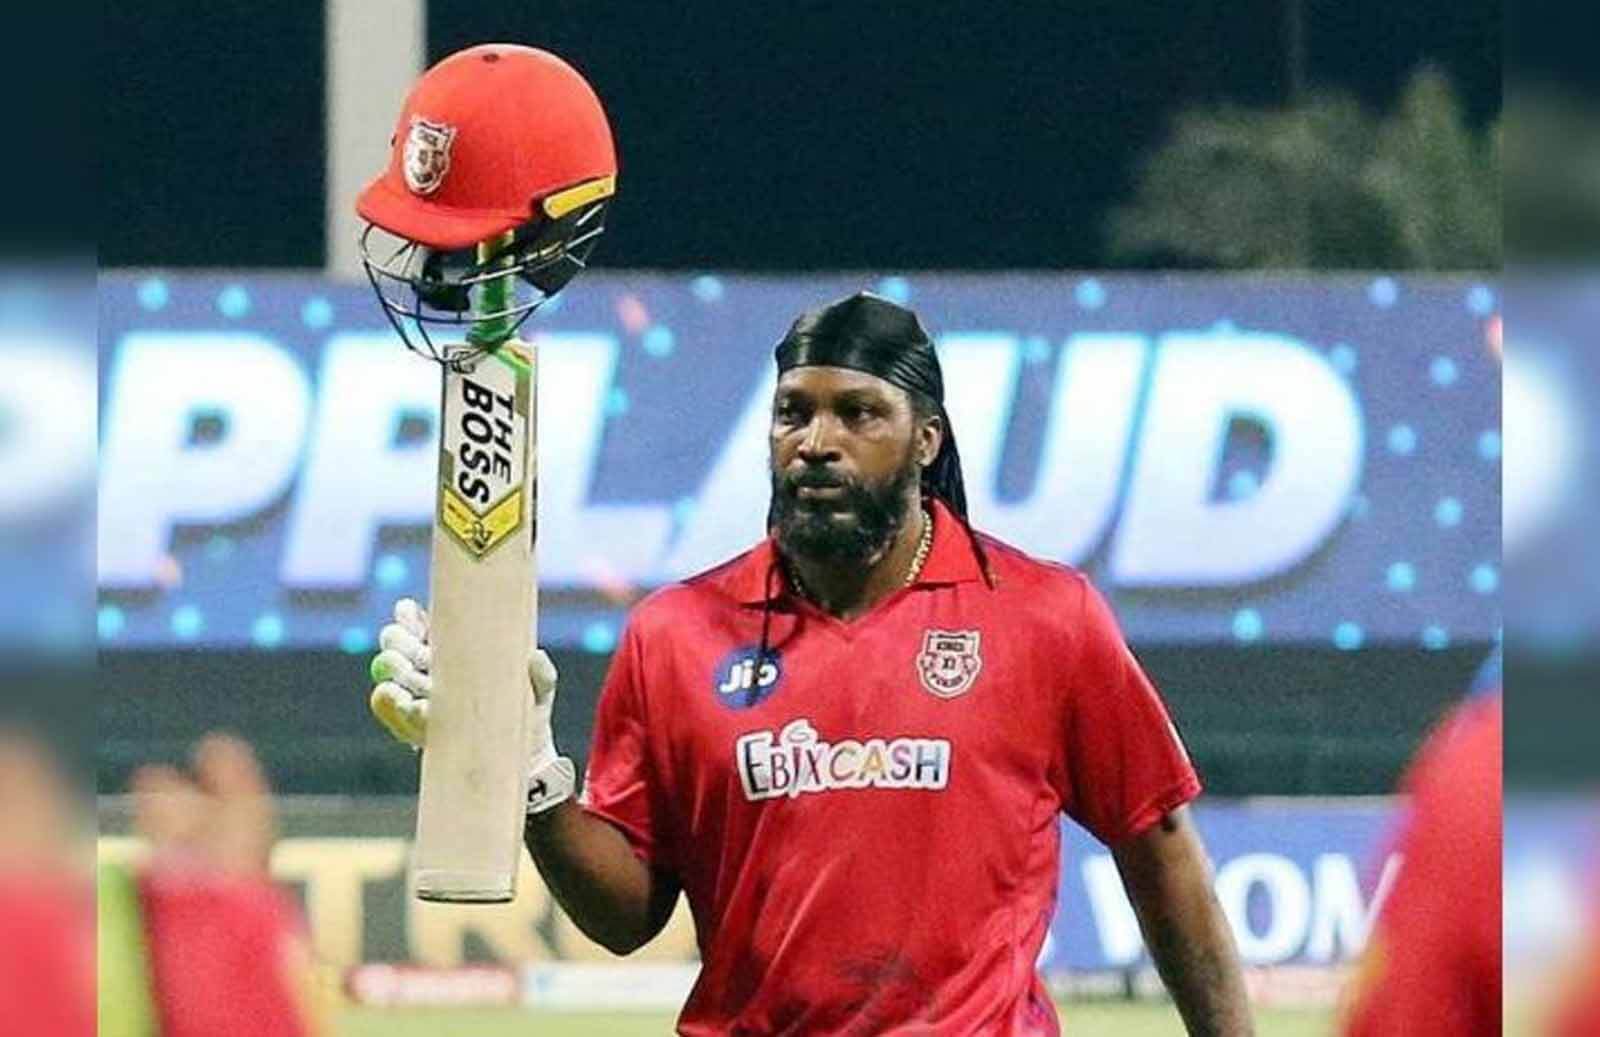 KXIP Co-Owner Ness Wadia Drops Big Hint On Chris Gayle Playing For Kings In IPL 2021